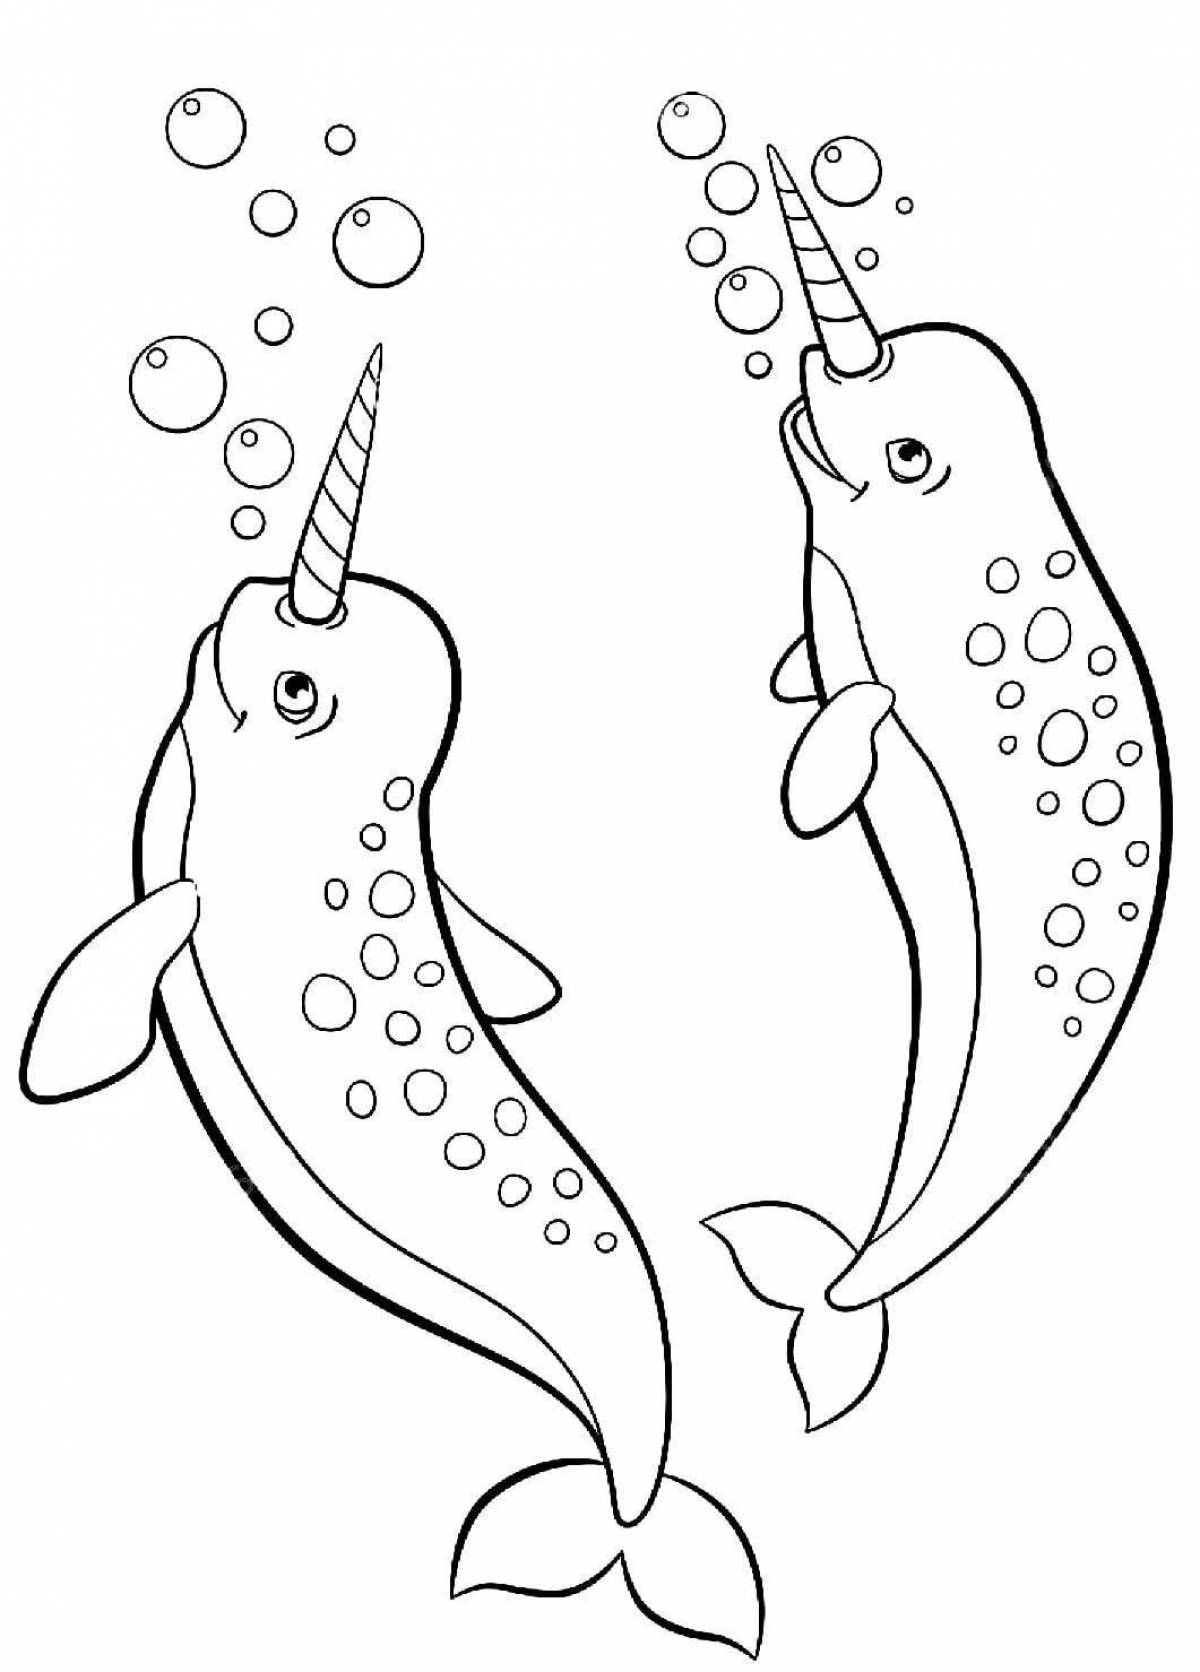 Playful narwhal coloring page for kids